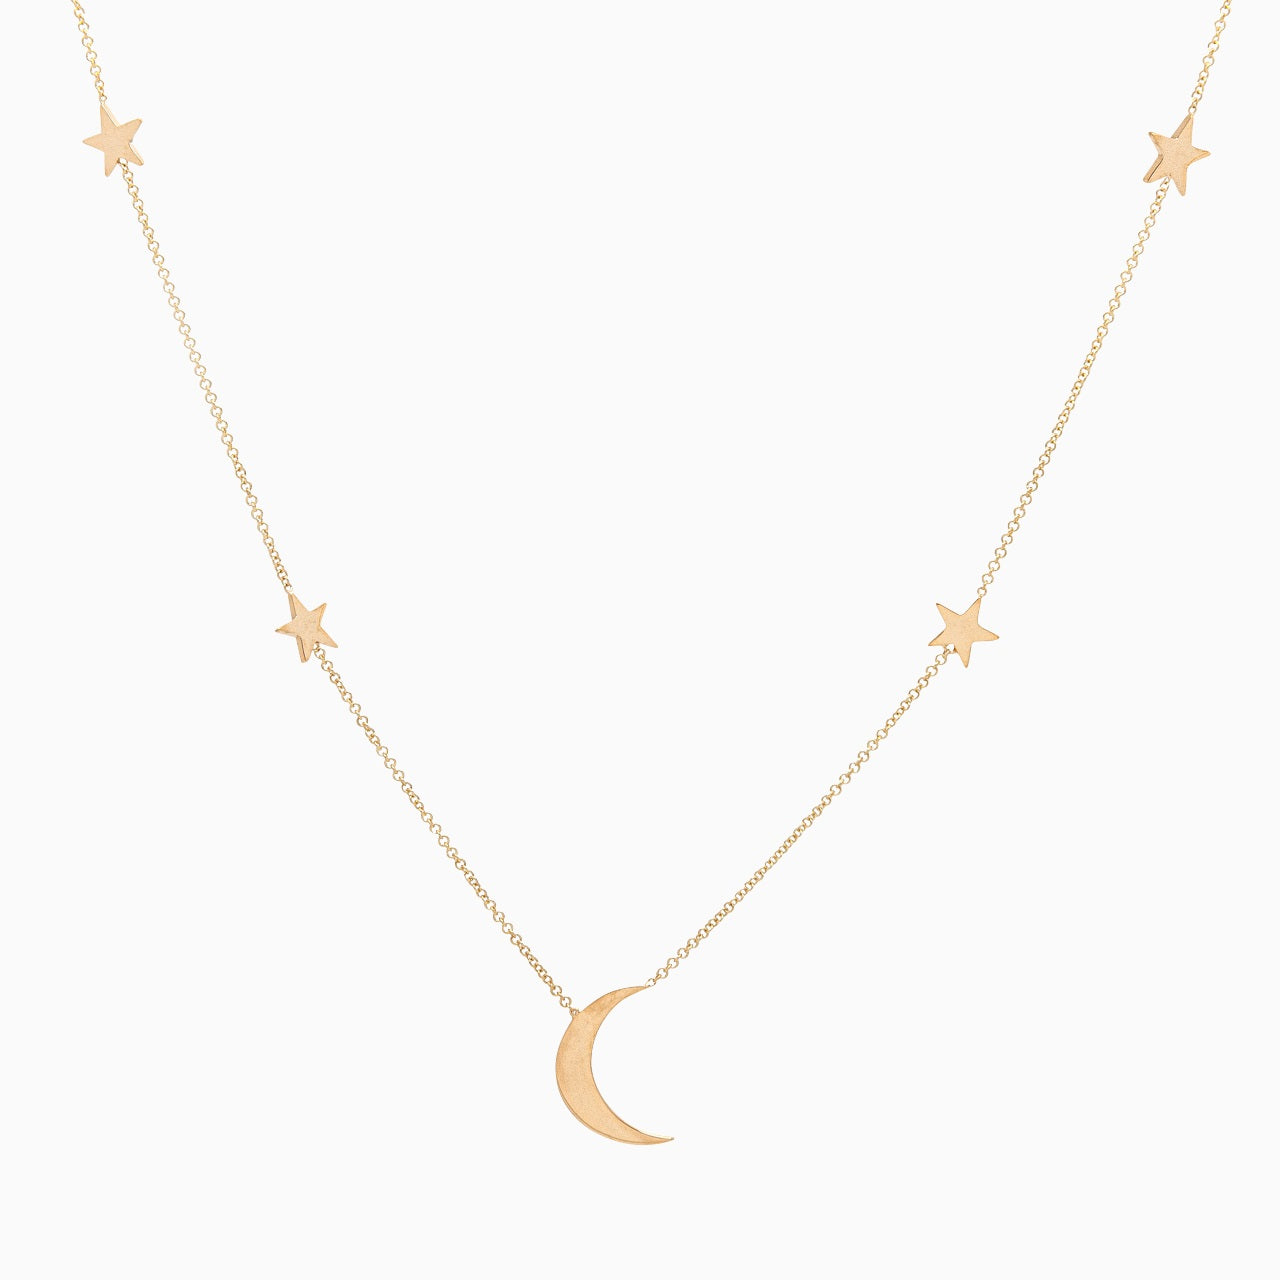 14k Yellow Gold Shoot for the Moon Station Necklace